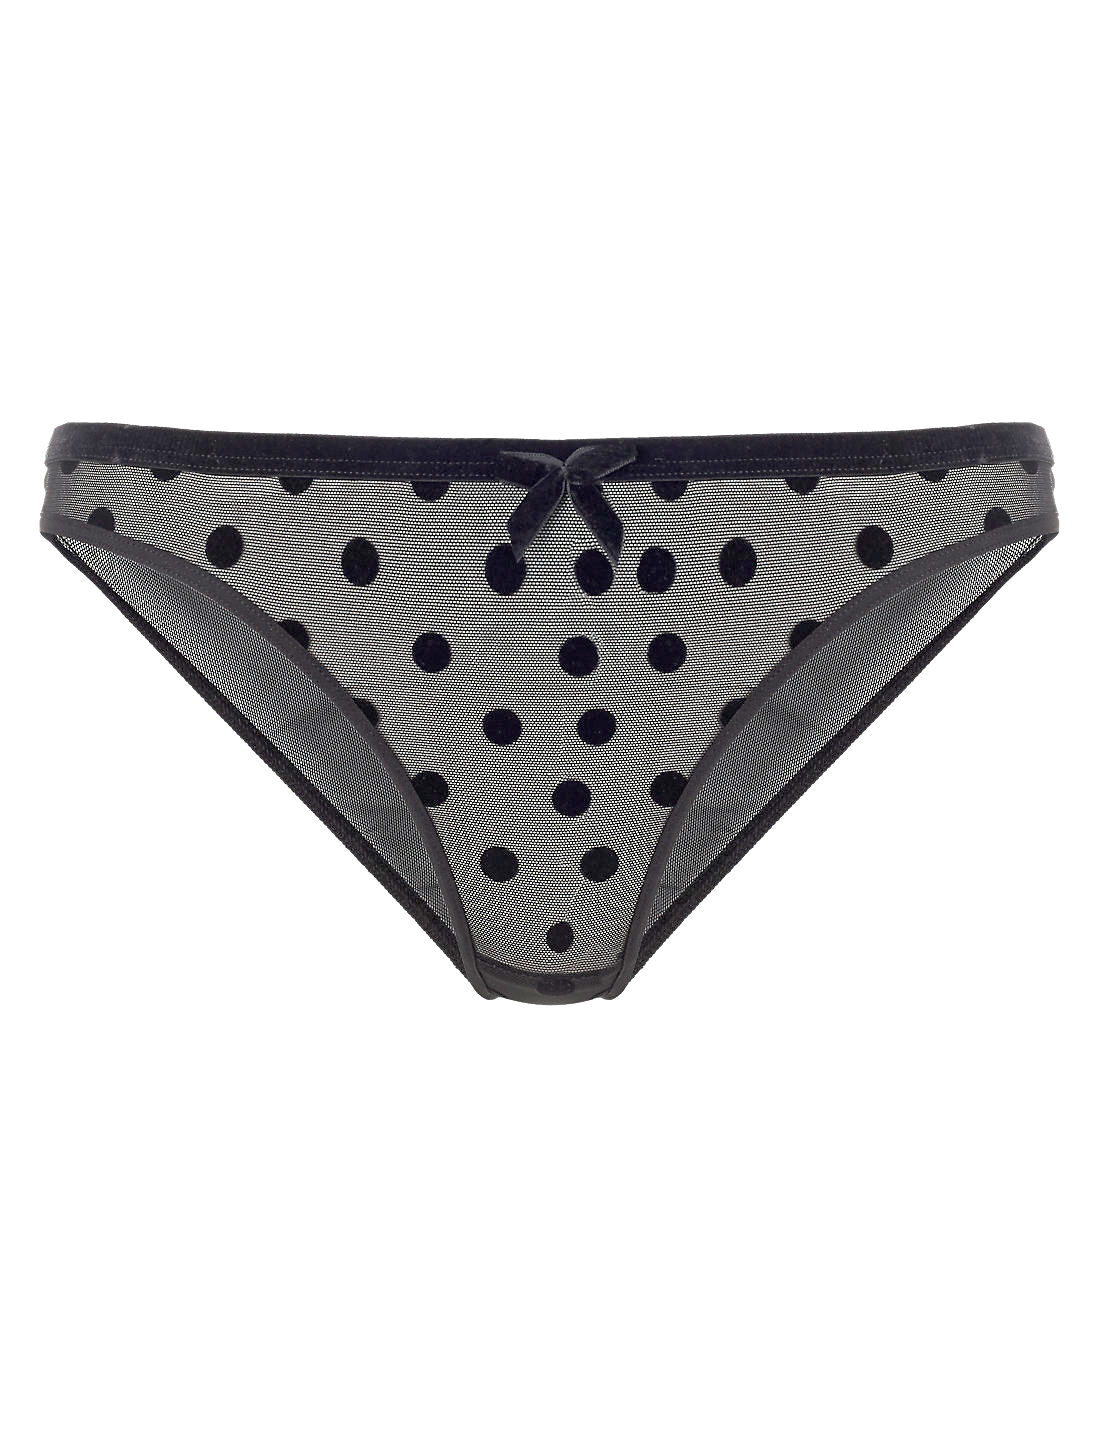 Marks and Spencer - - M&5 BLACK Flock Printed Bikini Knickers - Size 8 ...